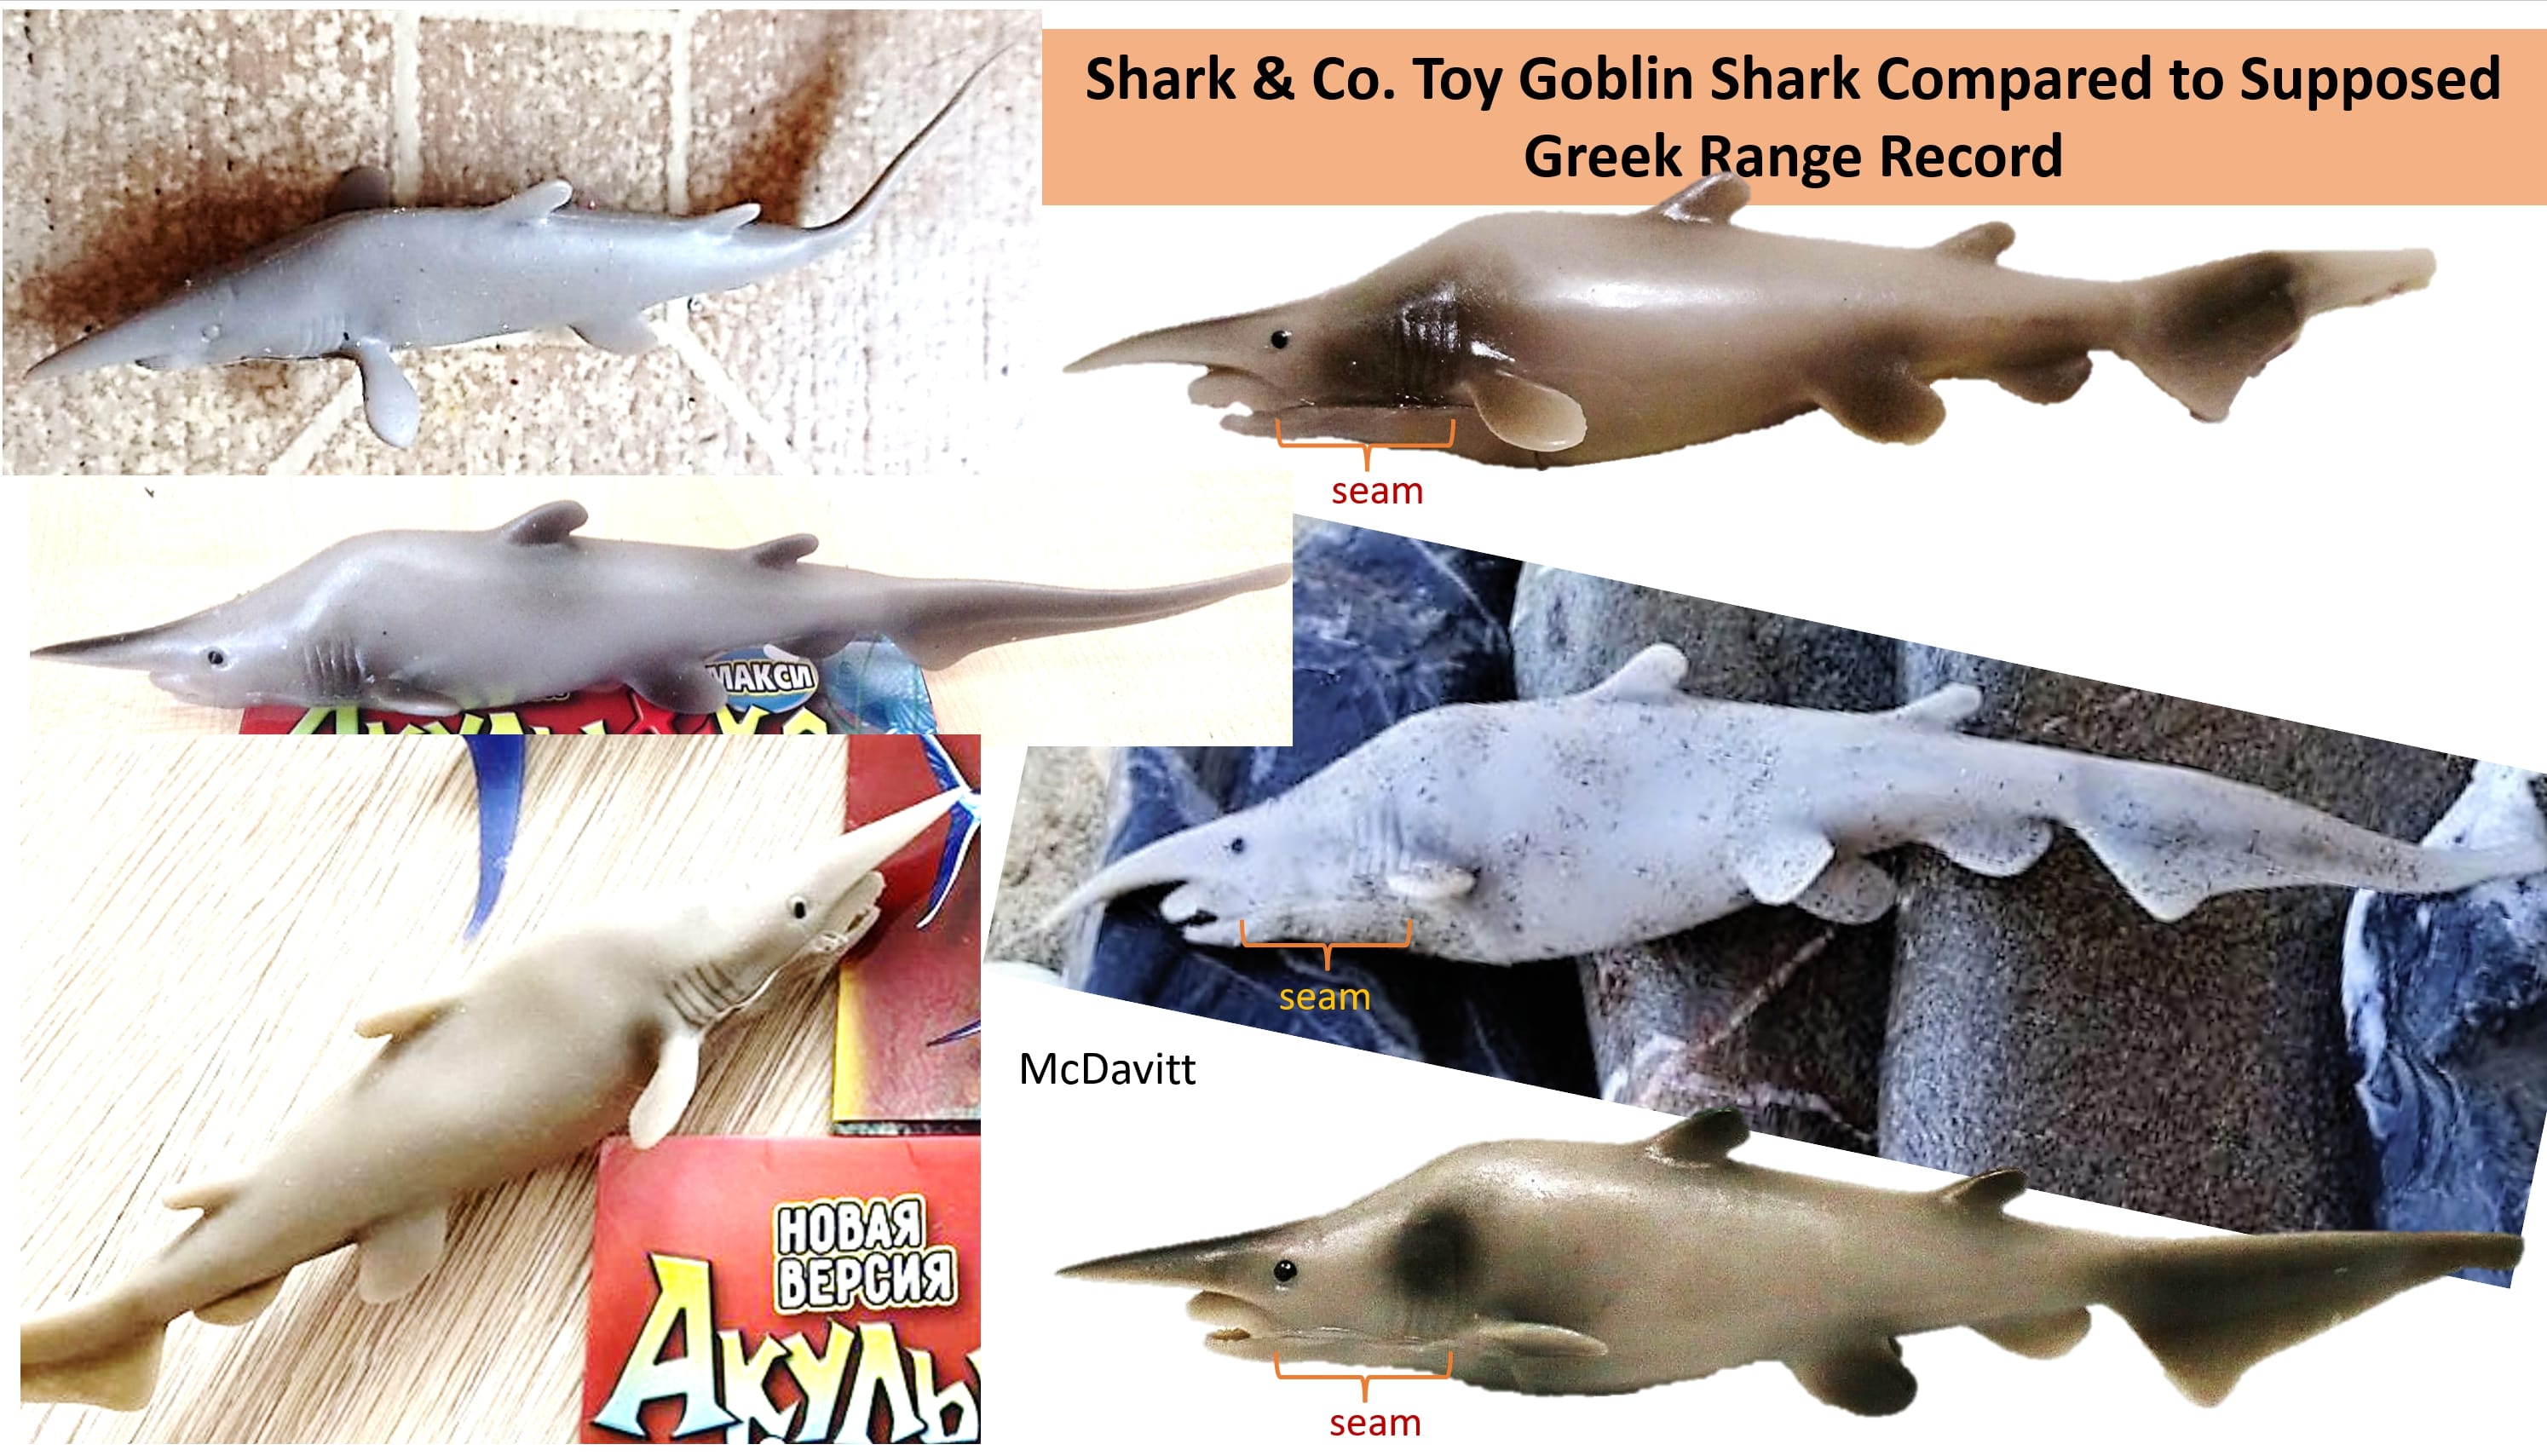 This photo collage shows the actual, published picture (middle right) alongside photos of the toy shark many believe is actually shown in the published photograph.  (Graphic: Matthew McDavitt)